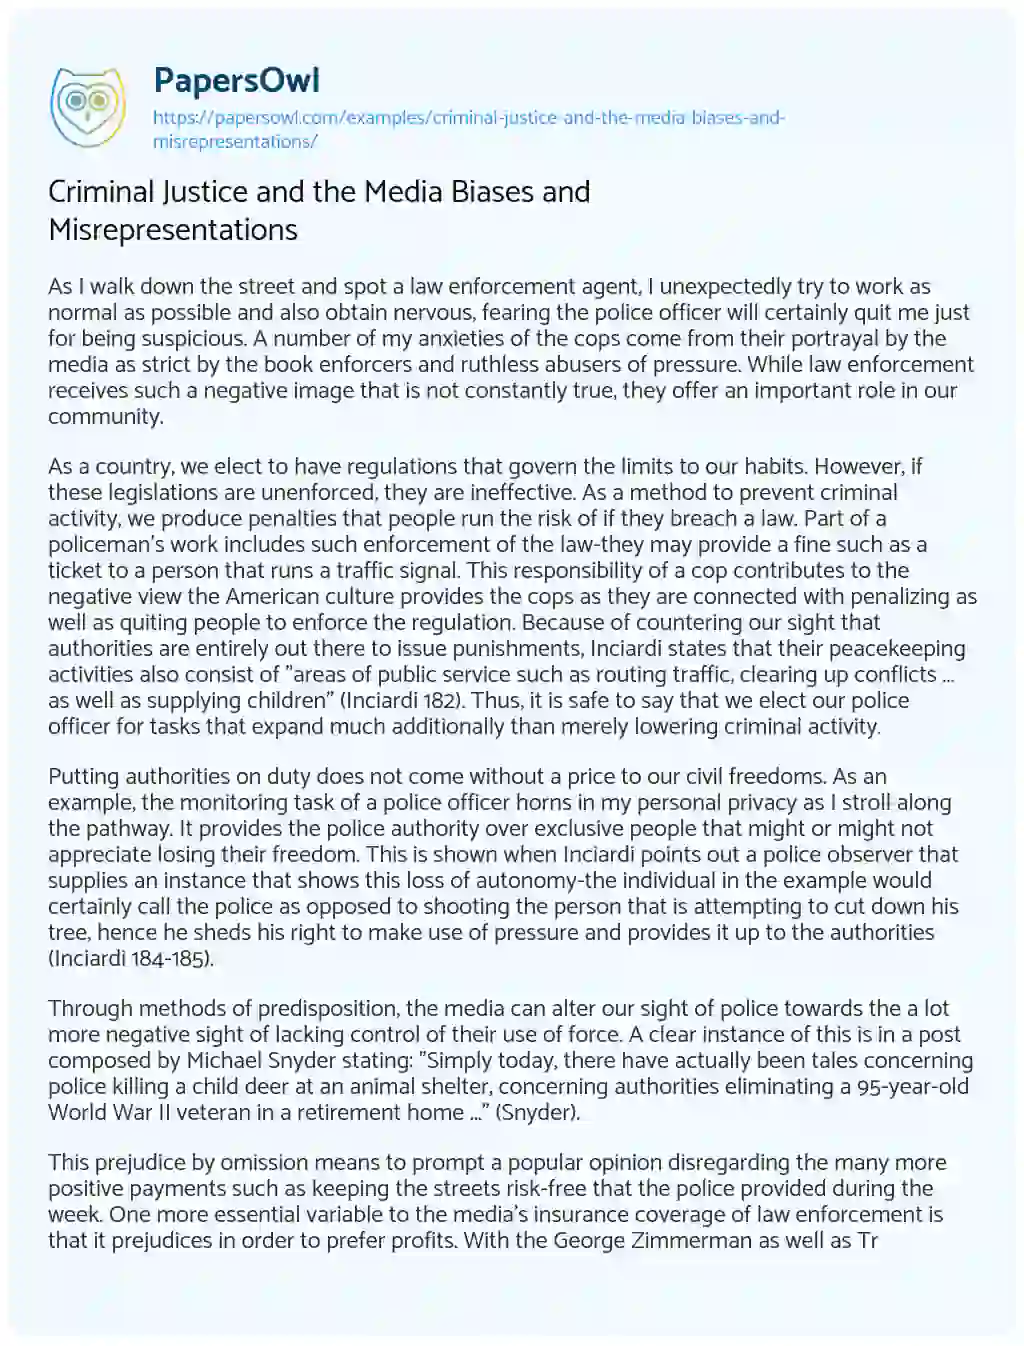 Essay on Criminal Justice and the Media Biases and Misrepresentations